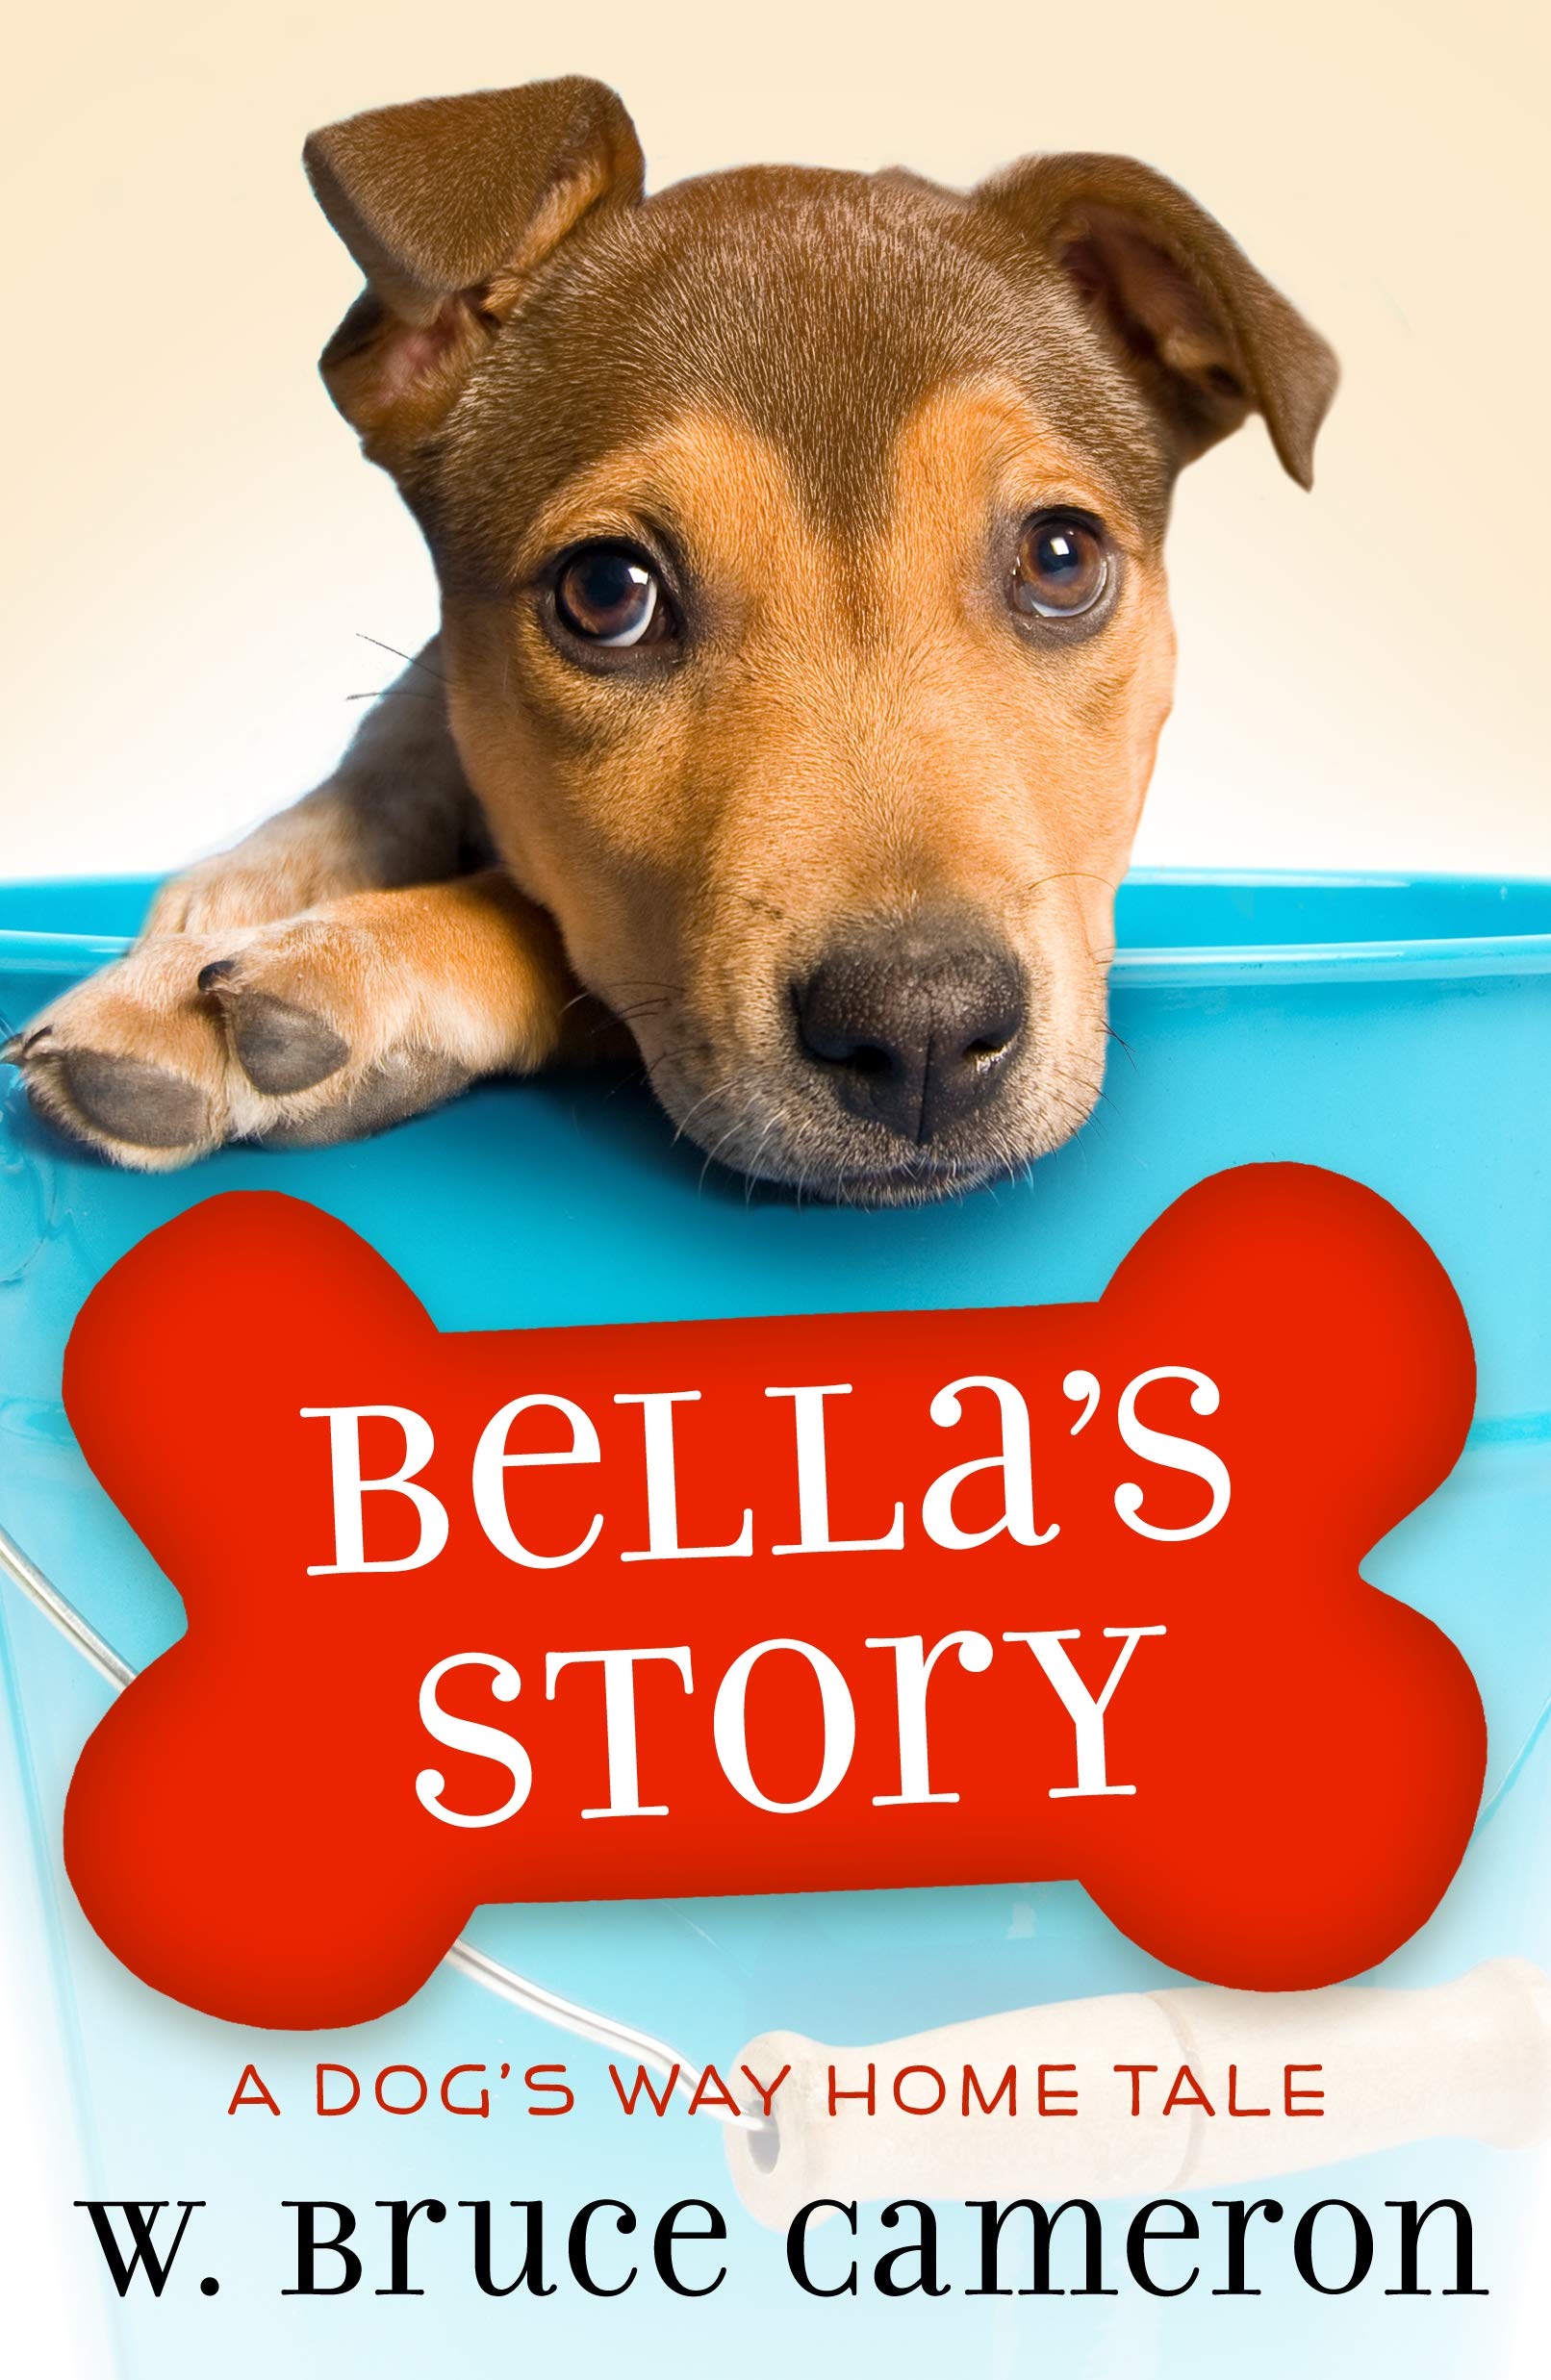 Bella's Story: A Dog's Way Home Tale